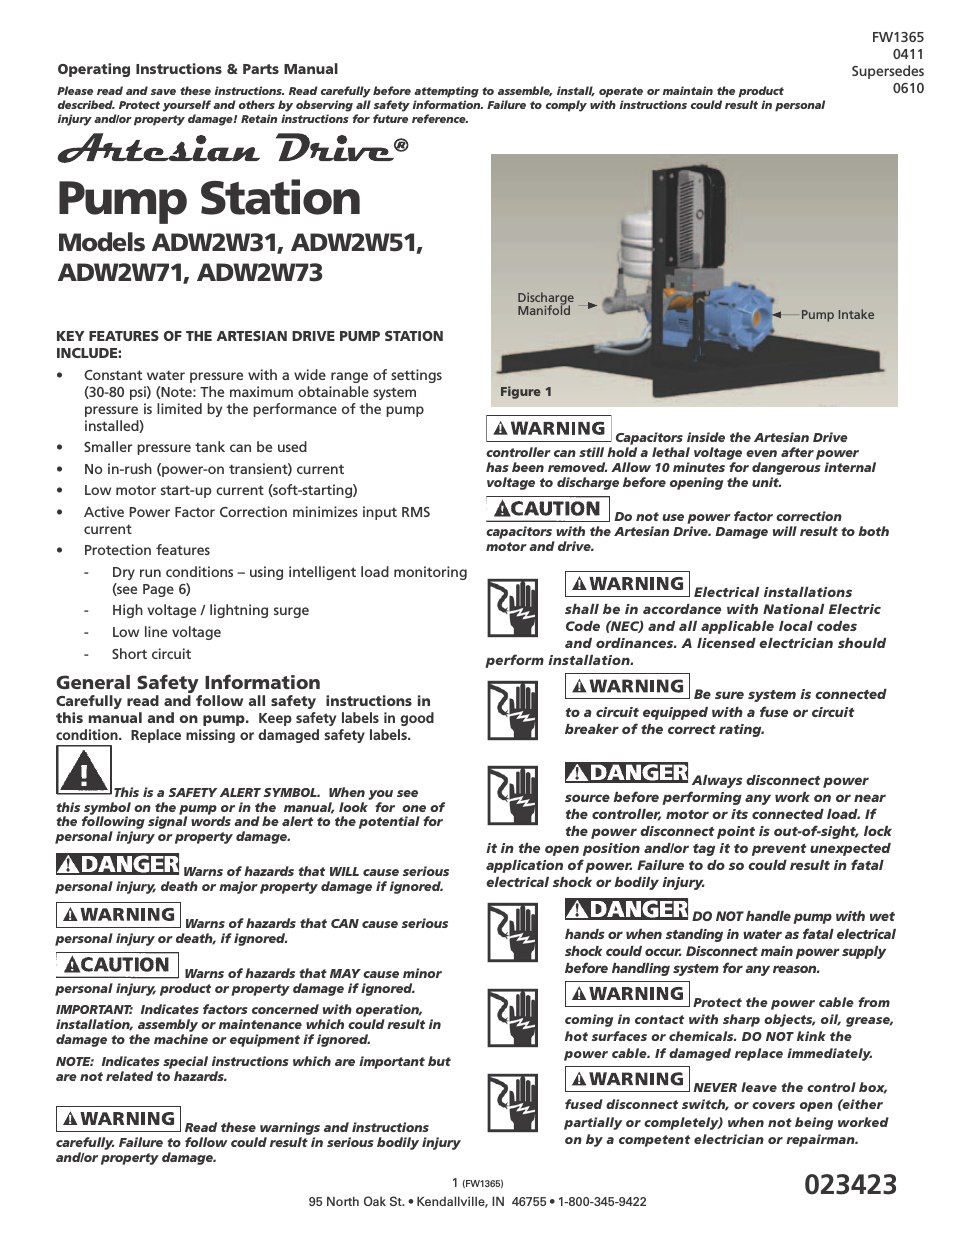 Constant Pressure Pumping Stations - ADW2W71